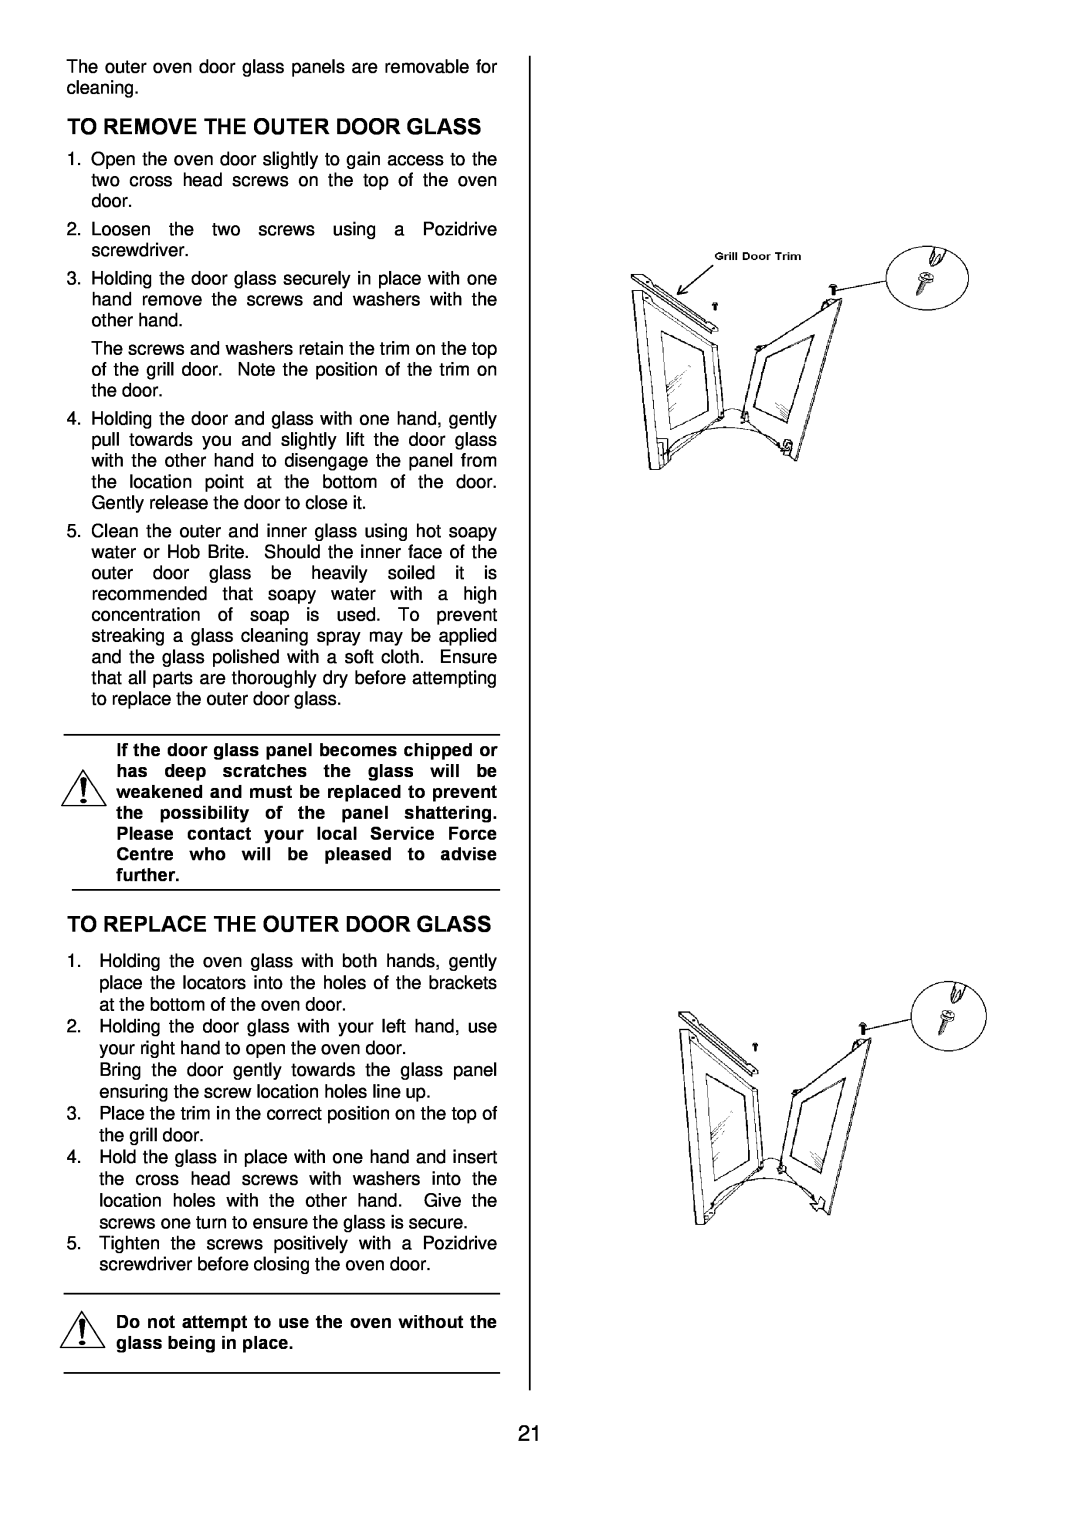 Tricity Bendix TBD950 installation instructions To Remove The Outer Door Glass, To Replace The Outer Door Glass 